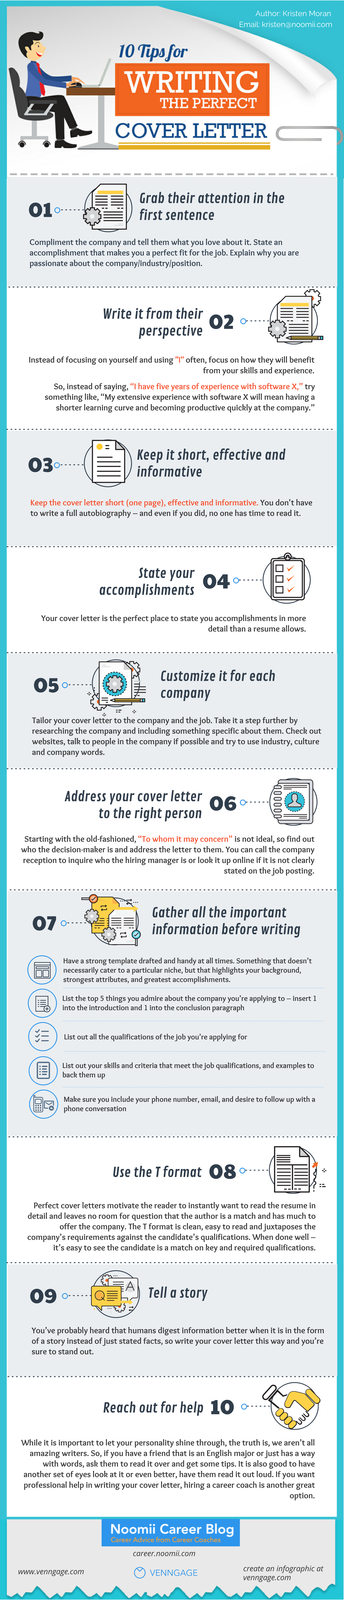 Infographic- 10 Tips For Writing the Perfect Cover Letter